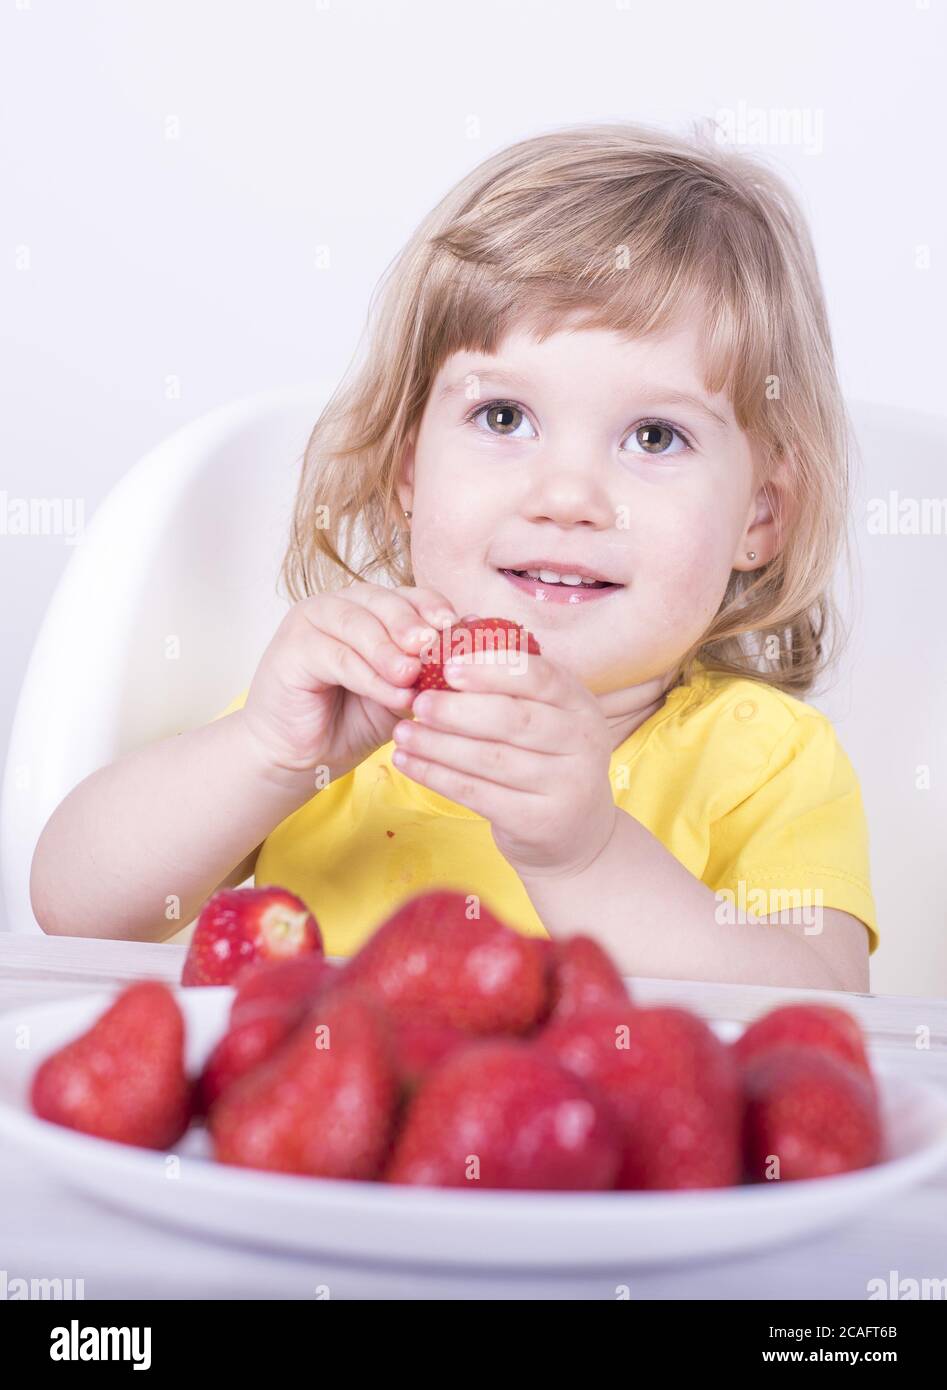 Selective focus shot of a happy little girl eating juicy strawberries Stock Photo